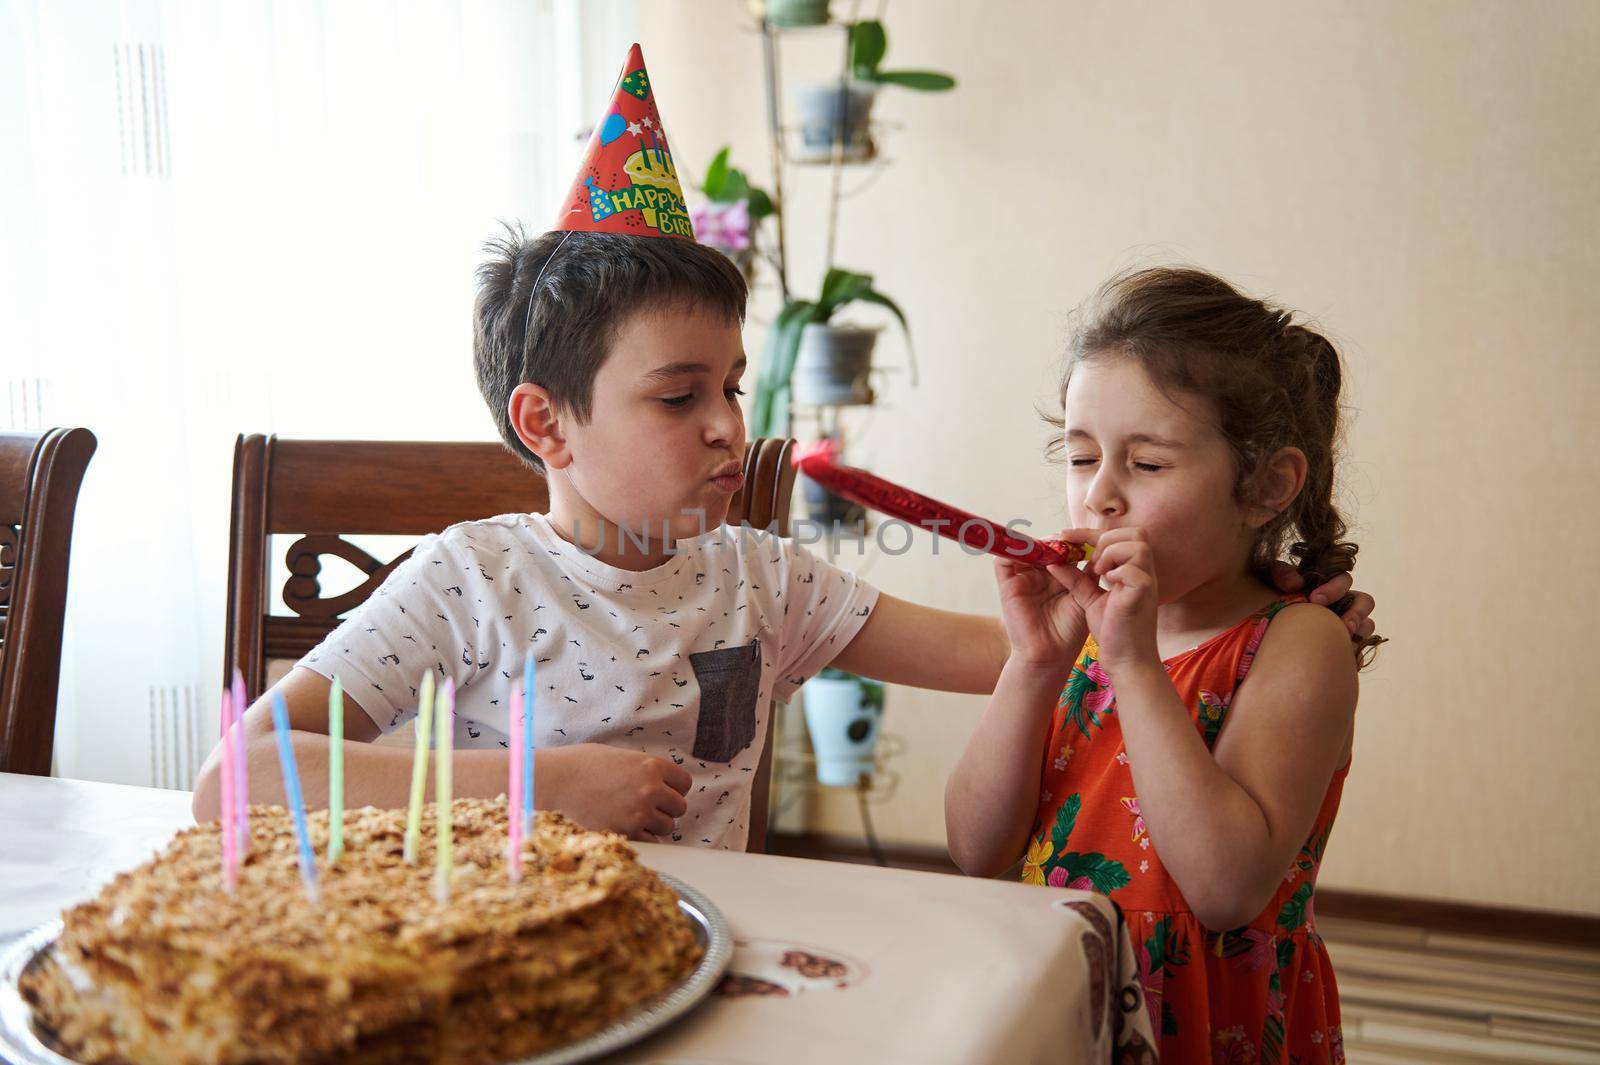 Charming adorable Caucasian kids, boy and girl, brother and sister celebrating birthday party at home. Handmade baked birthday cake with colorful candles on a kitchen table.